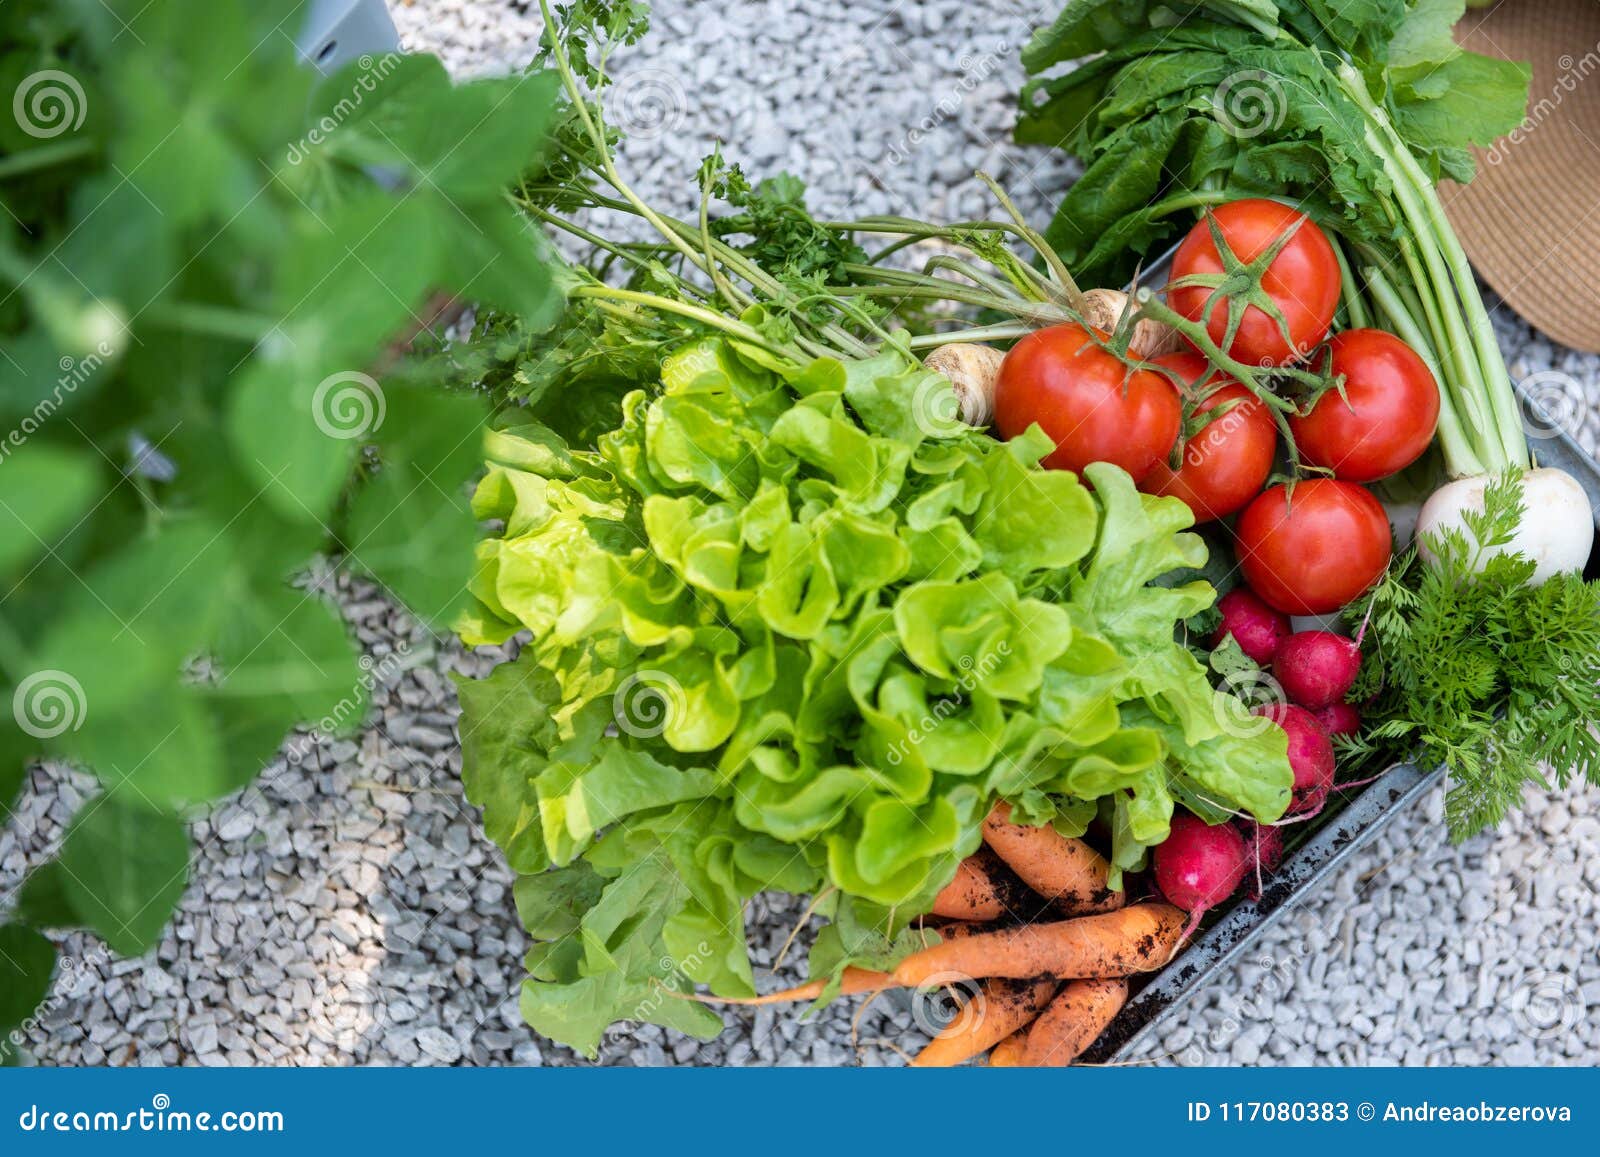 crate full of freshly harvested vegetables in a garden. homegrown bio produce concept. top view.